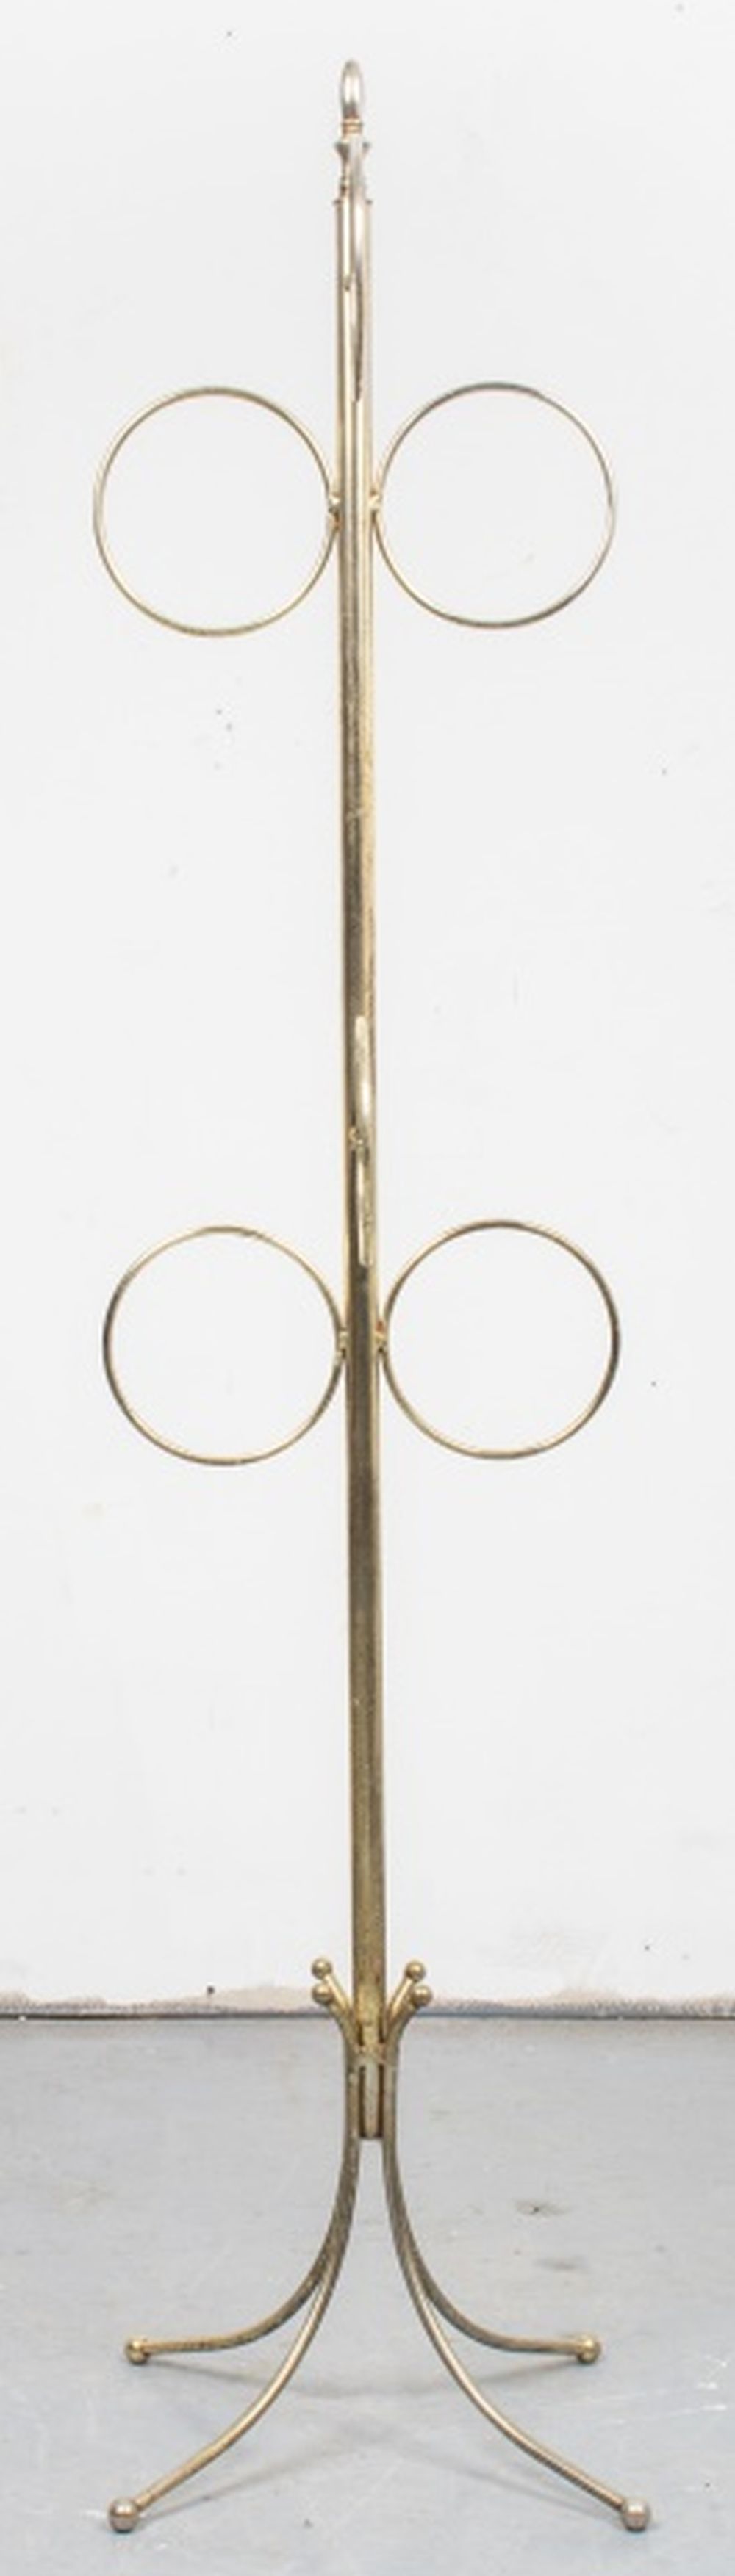 MODERN COAT SCARF RACK WITH RING 3cef73